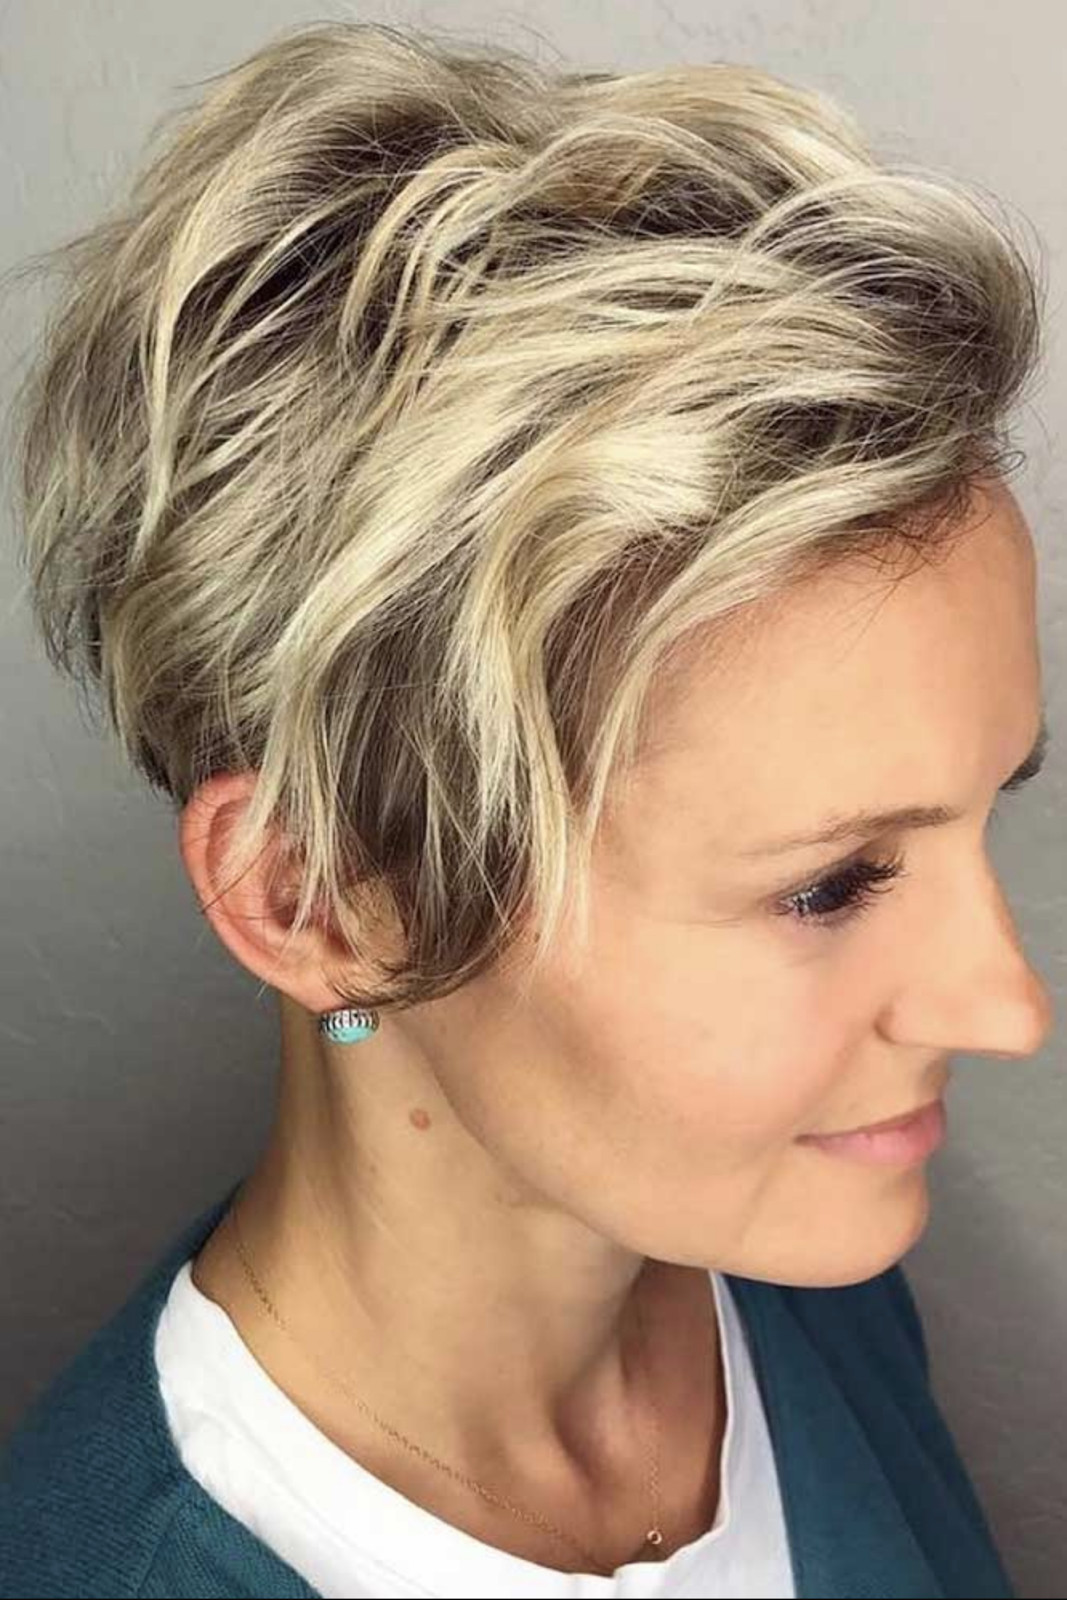 Short Haircuts For Fine Hair 2020
 2019 2020 Short Hairstyles for Women Over 50 That Are